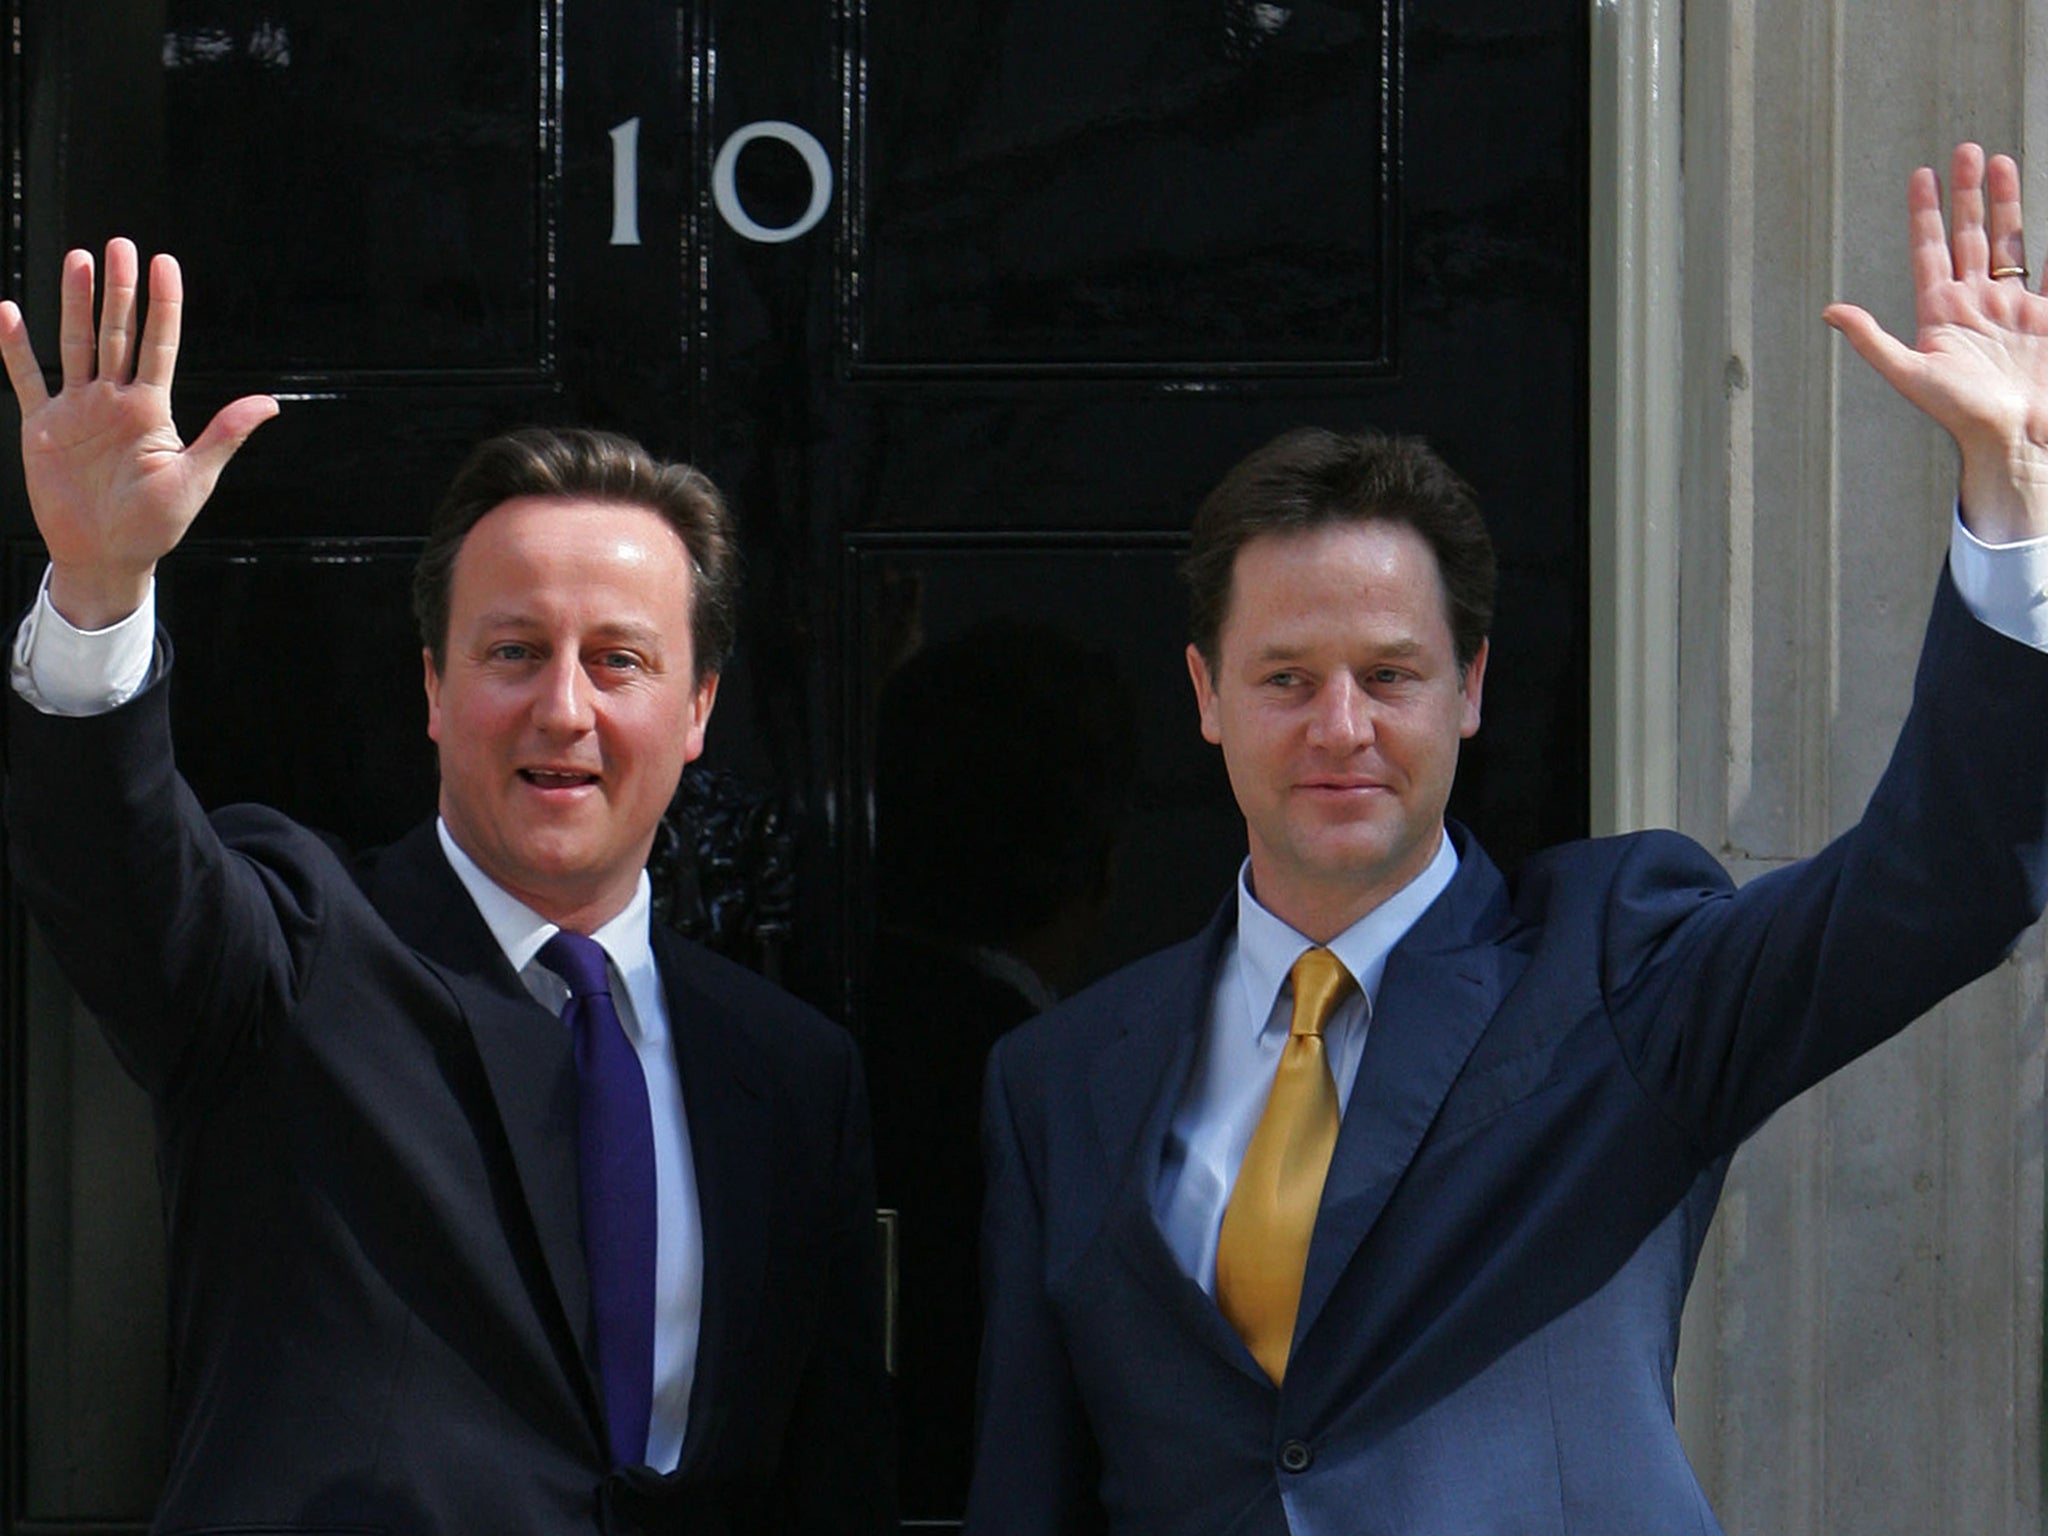 In 2010 it took five frantic days to form a coalition after the Conservatives failed to win an overall majority in the House of Commons